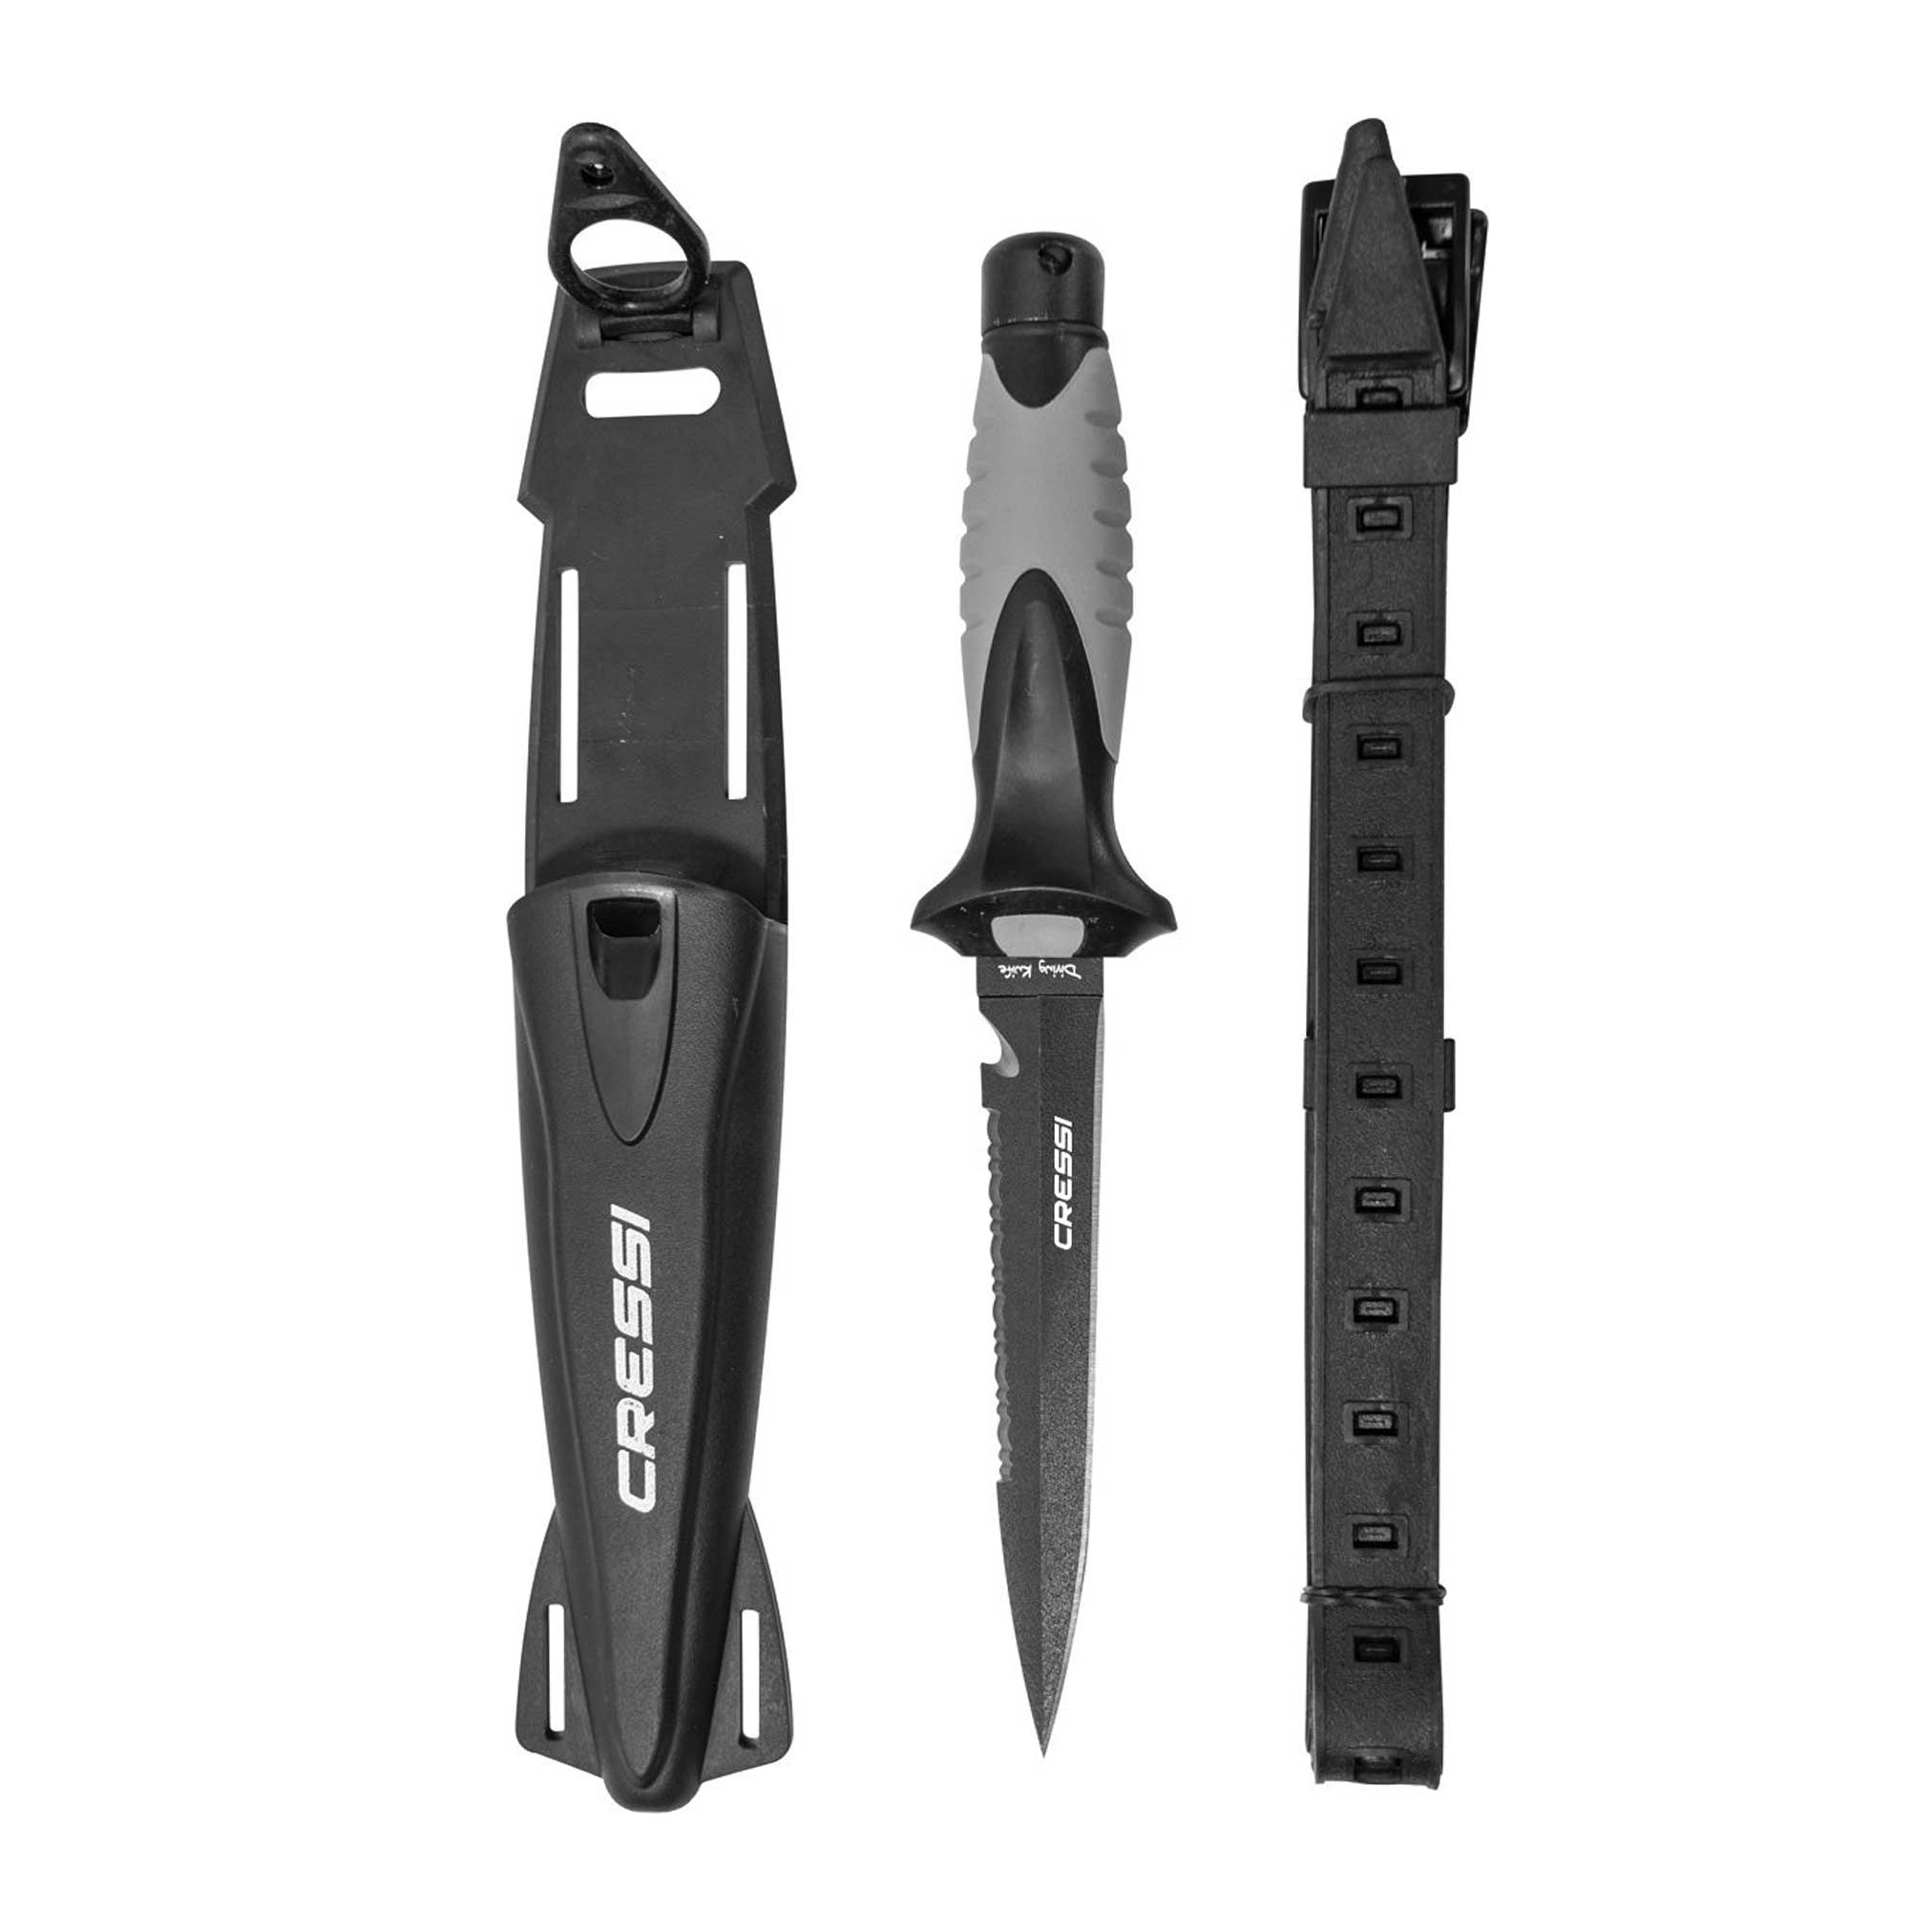 Cressi Finisher Spearfishing Dive Knife